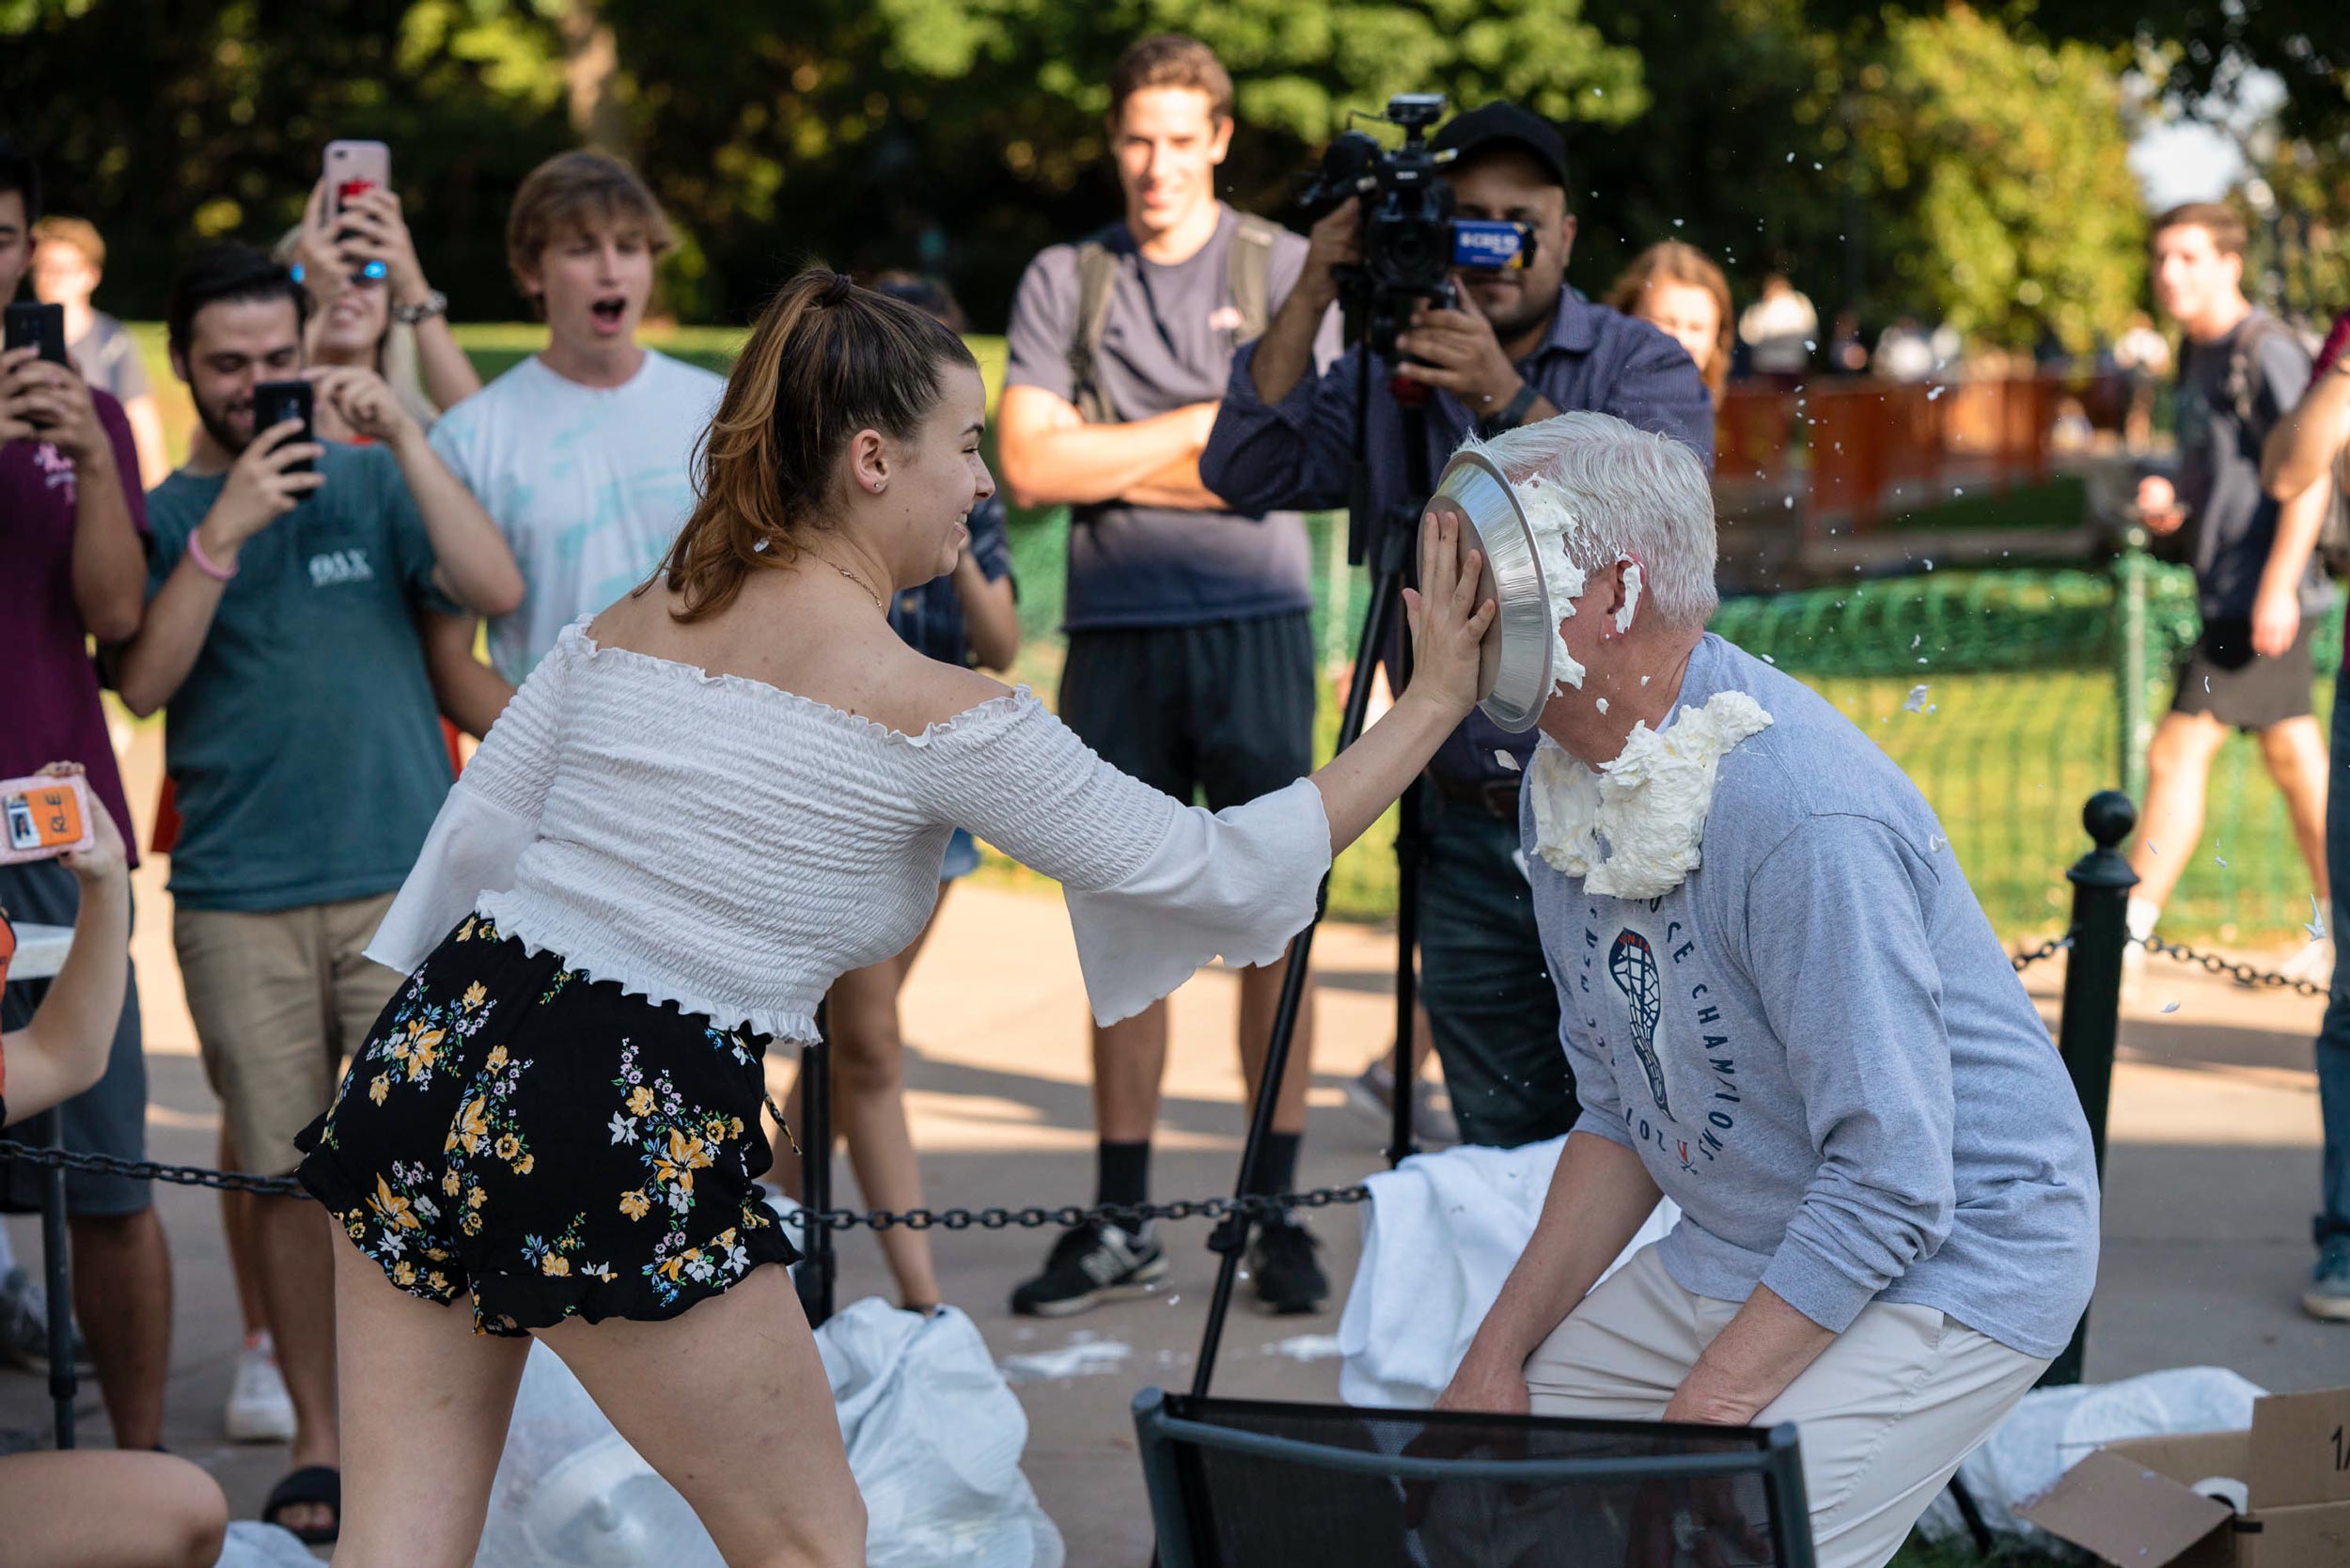 Lilly Massey pies Dean Groves in the face